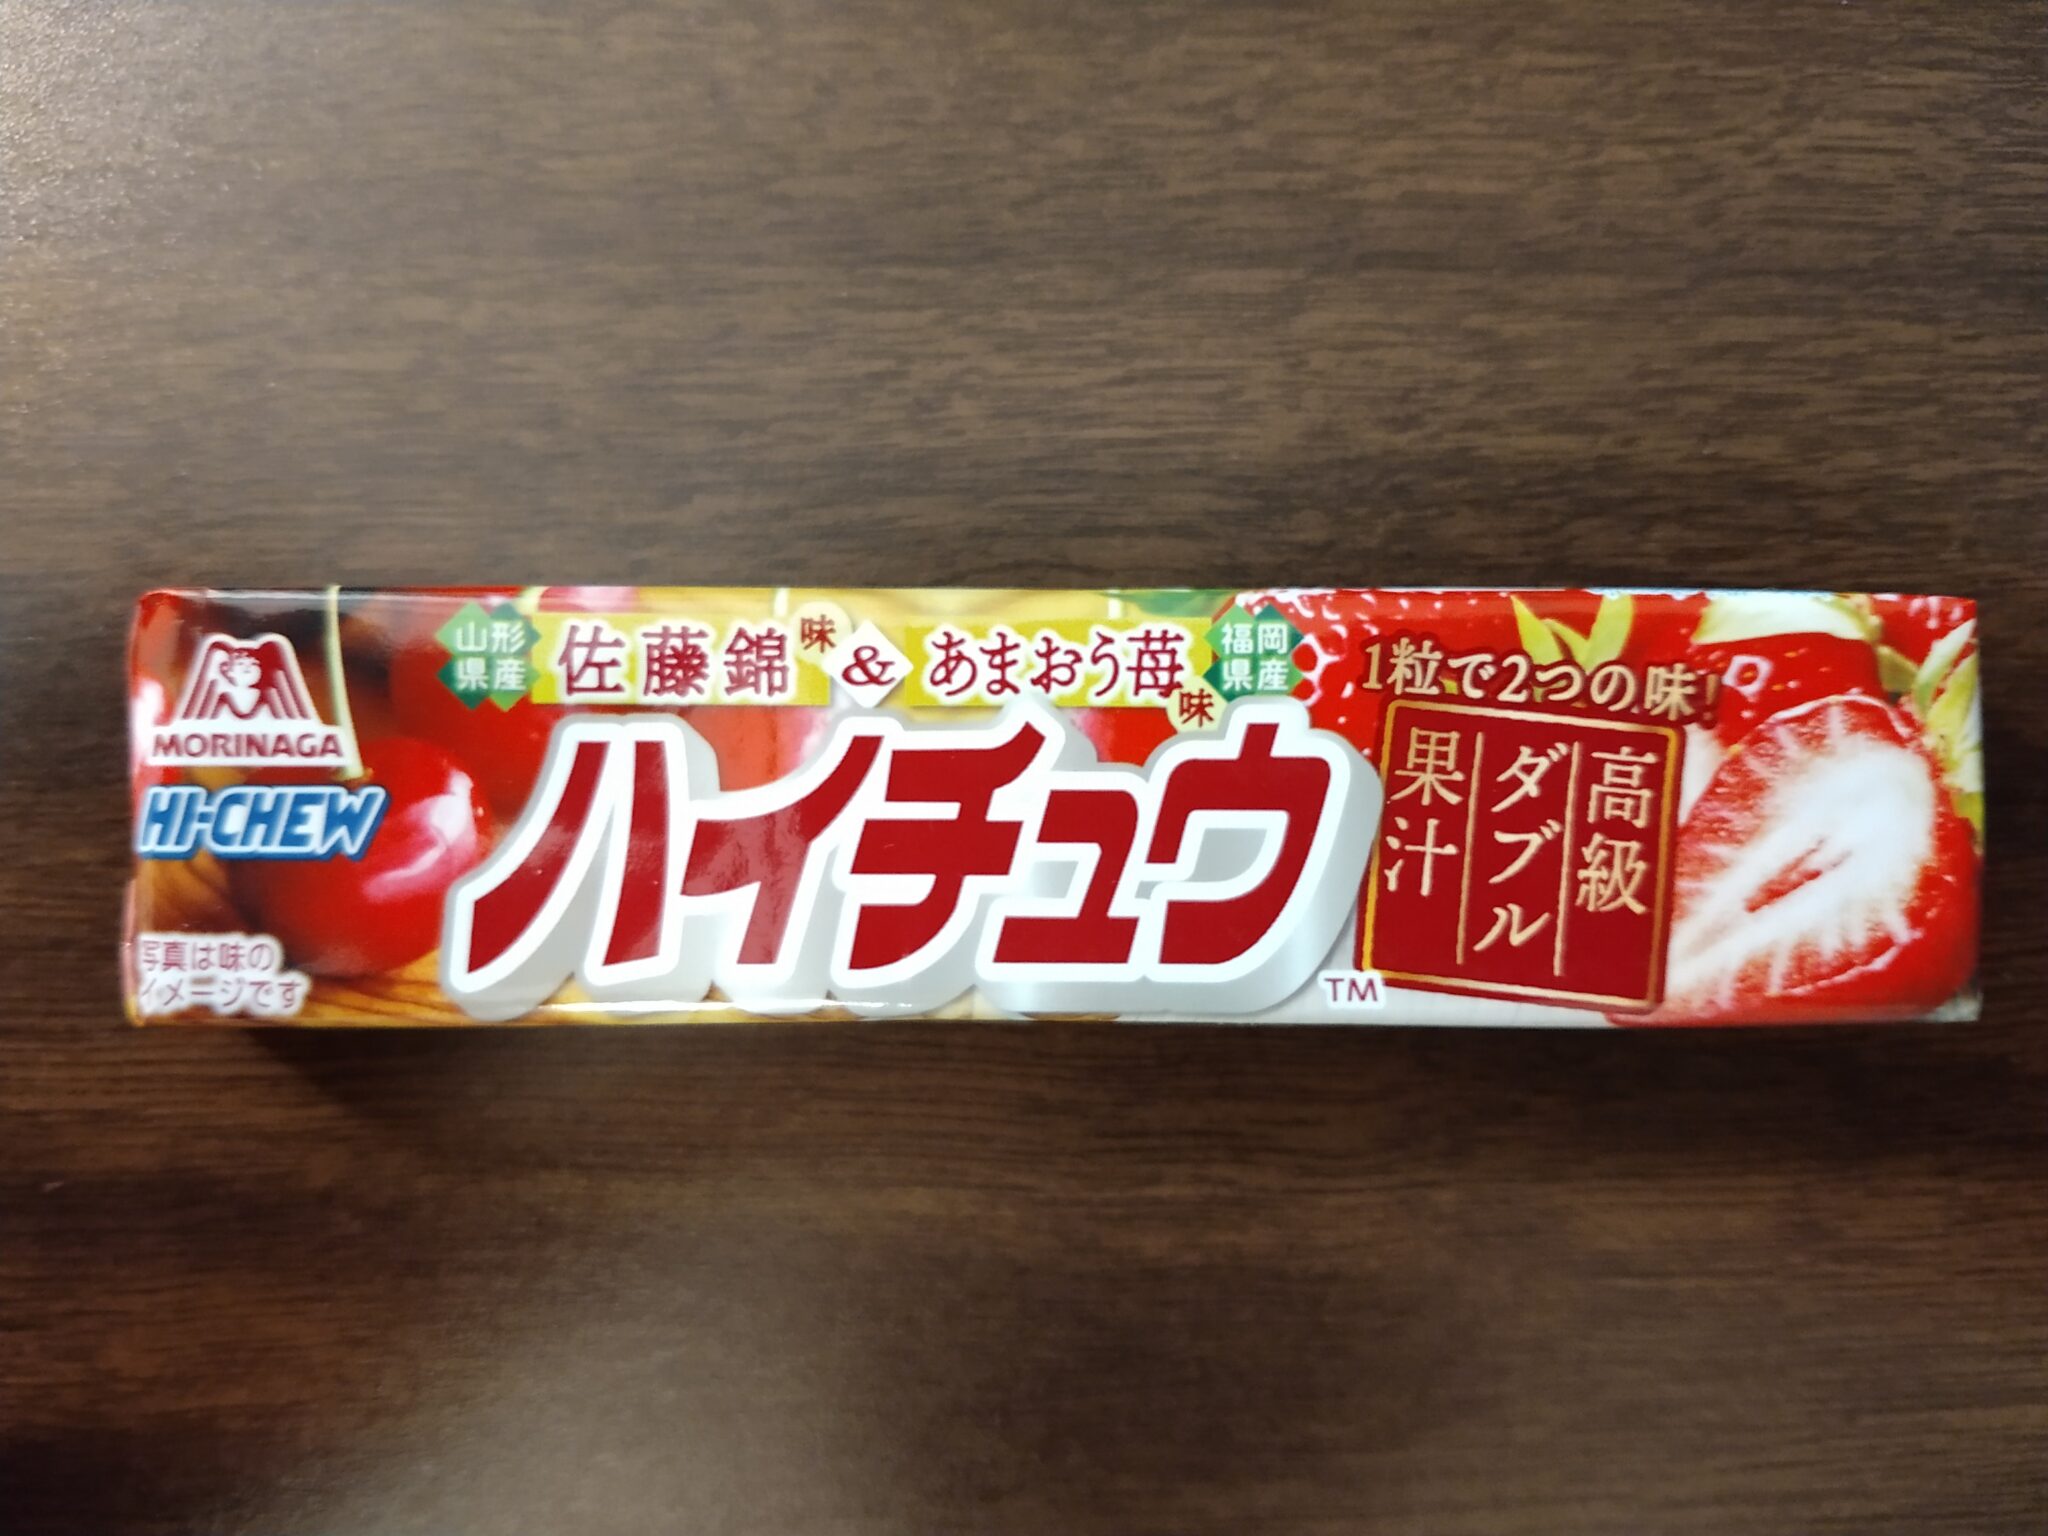 Hi-Chew Doubles – Cherry and Strawberry